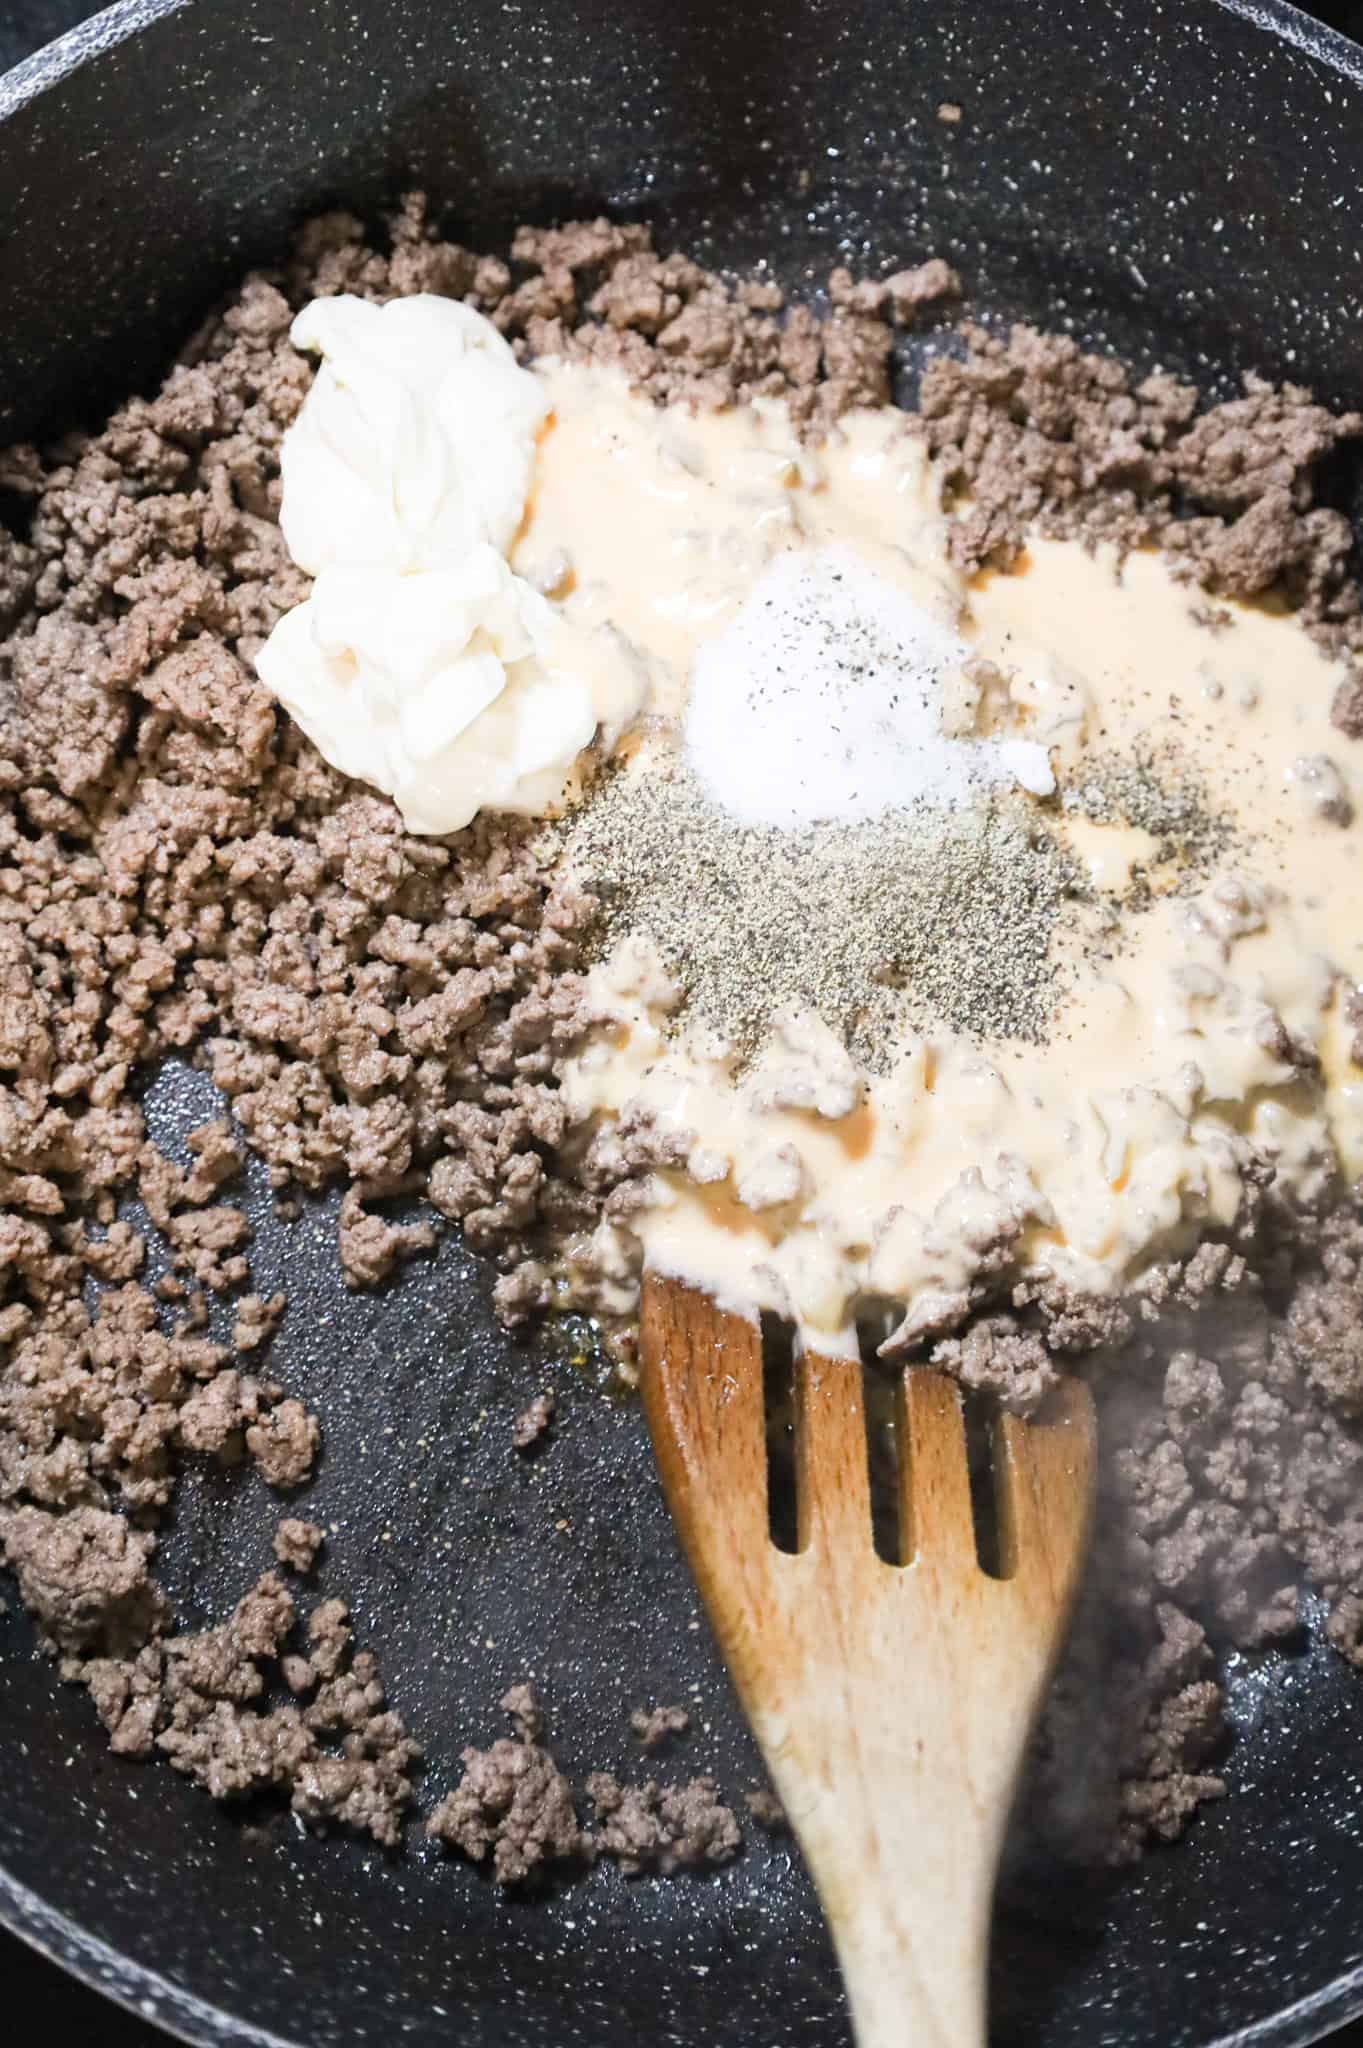 mayo, Thousand Island dressing, salt and pepper on top of ground beef in a skillet